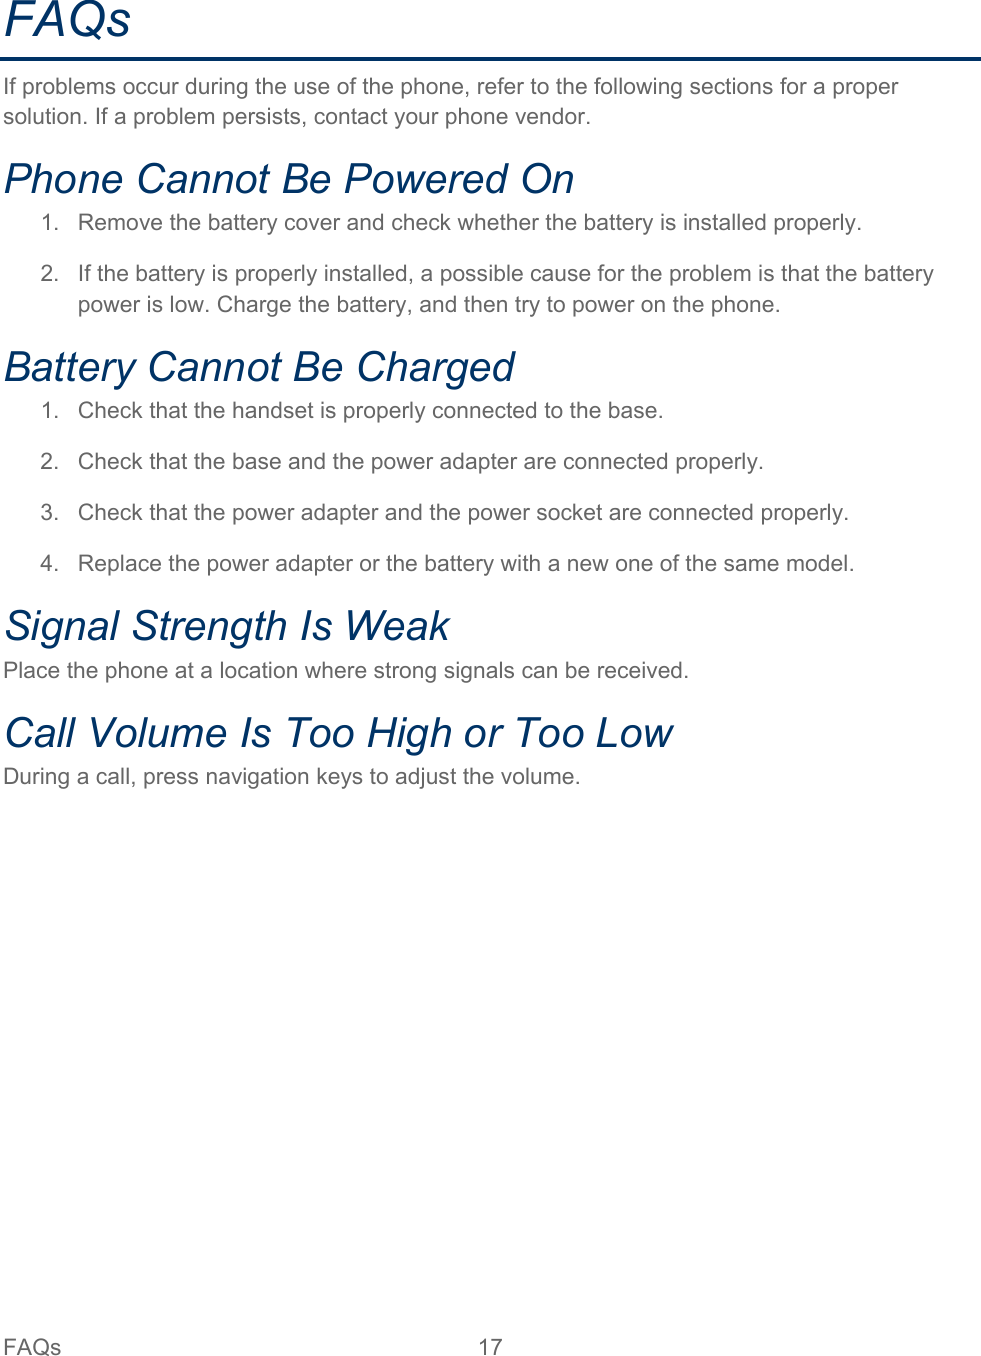 FAQs 17   FAQs If problems occur during the use of the phone, refer to the following sections for a proper solution. If a problem persists, contact your phone vendor. Phone Cannot Be Powered On 1. Remove the battery cover and check whether the battery is installed properly. 2. If the battery is properly installed, a possible cause for the problem is that the battery power is low. Charge the battery, and then try to power on the phone. Battery Cannot Be Charged 1. Check that the handset is properly connected to the base. 2. Check that the base and the power adapter are connected properly. 3. Check that the power adapter and the power socket are connected properly. 4. Replace the power adapter or the battery with a new one of the same model. Signal Strength Is Weak Place the phone at a location where strong signals can be received. Call Volume Is Too High or Too Low During a call, press navigation keys to adjust the volume.  